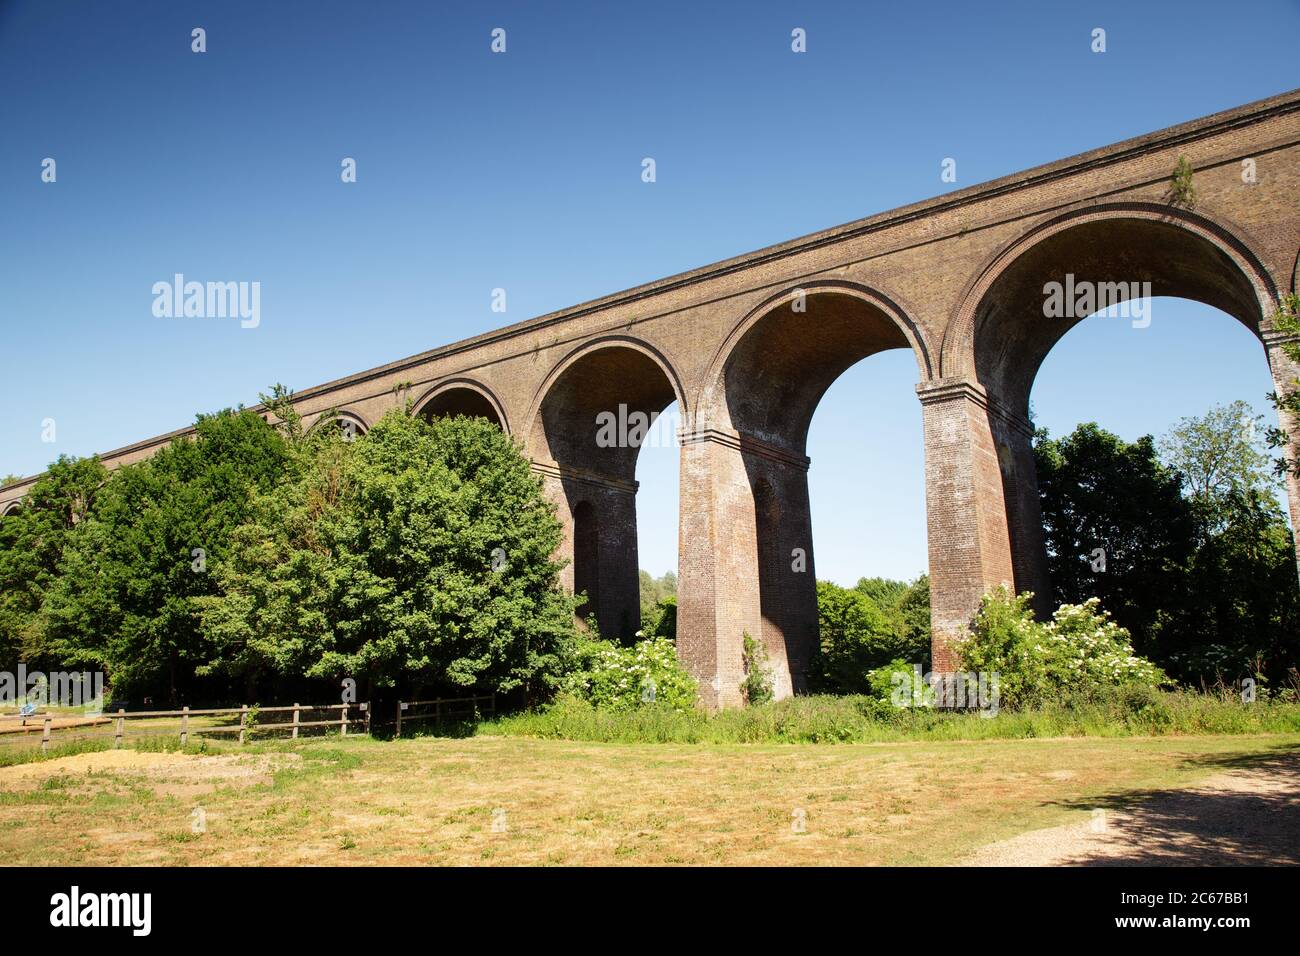 landscape image of chappel viaduct in essex enland Stock Photo